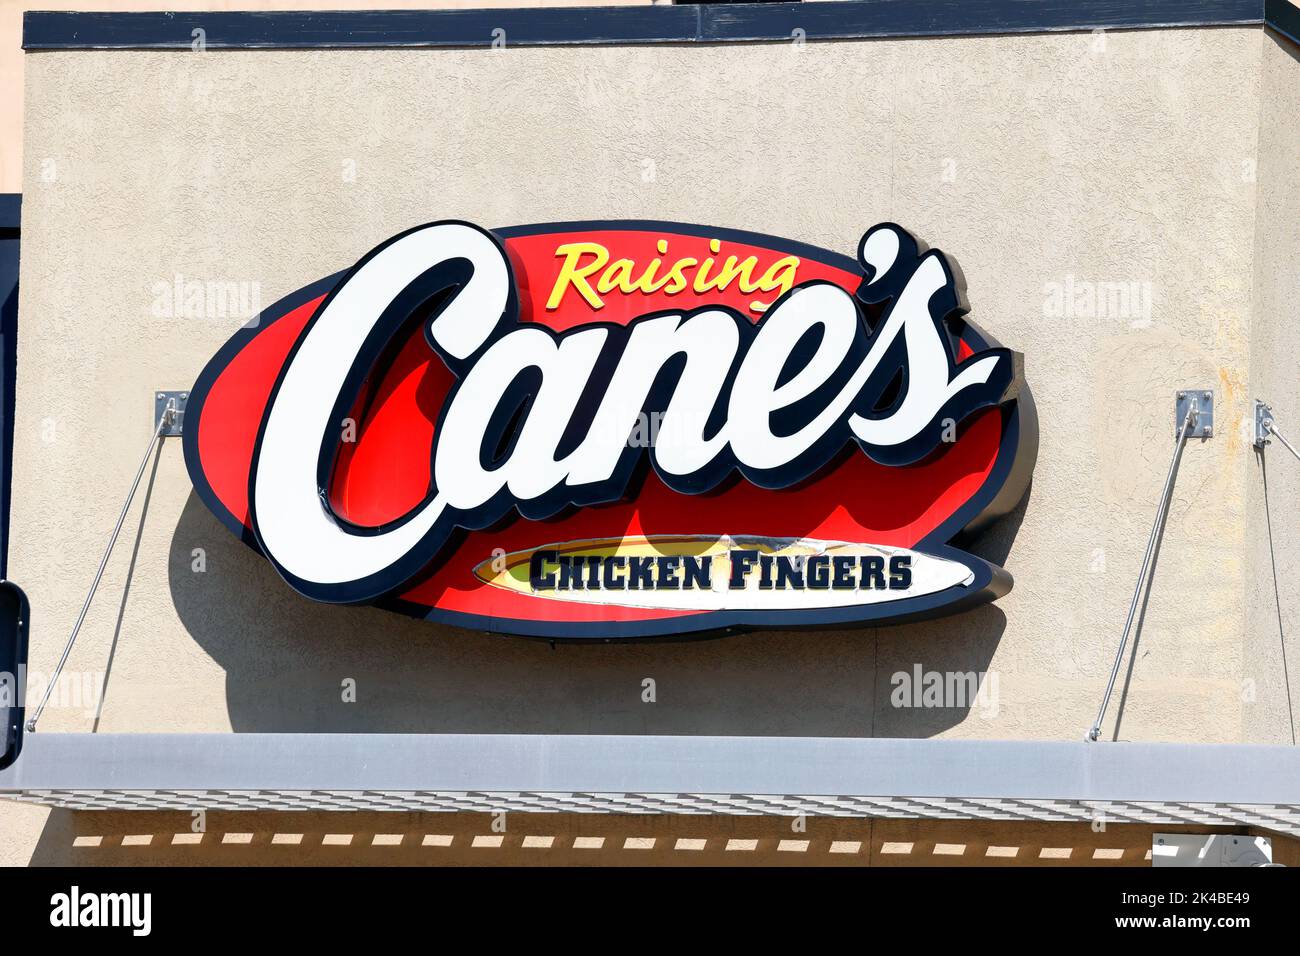 A Raising Cane's chicken fingers fast food signage on a building in Boston Stock Photo